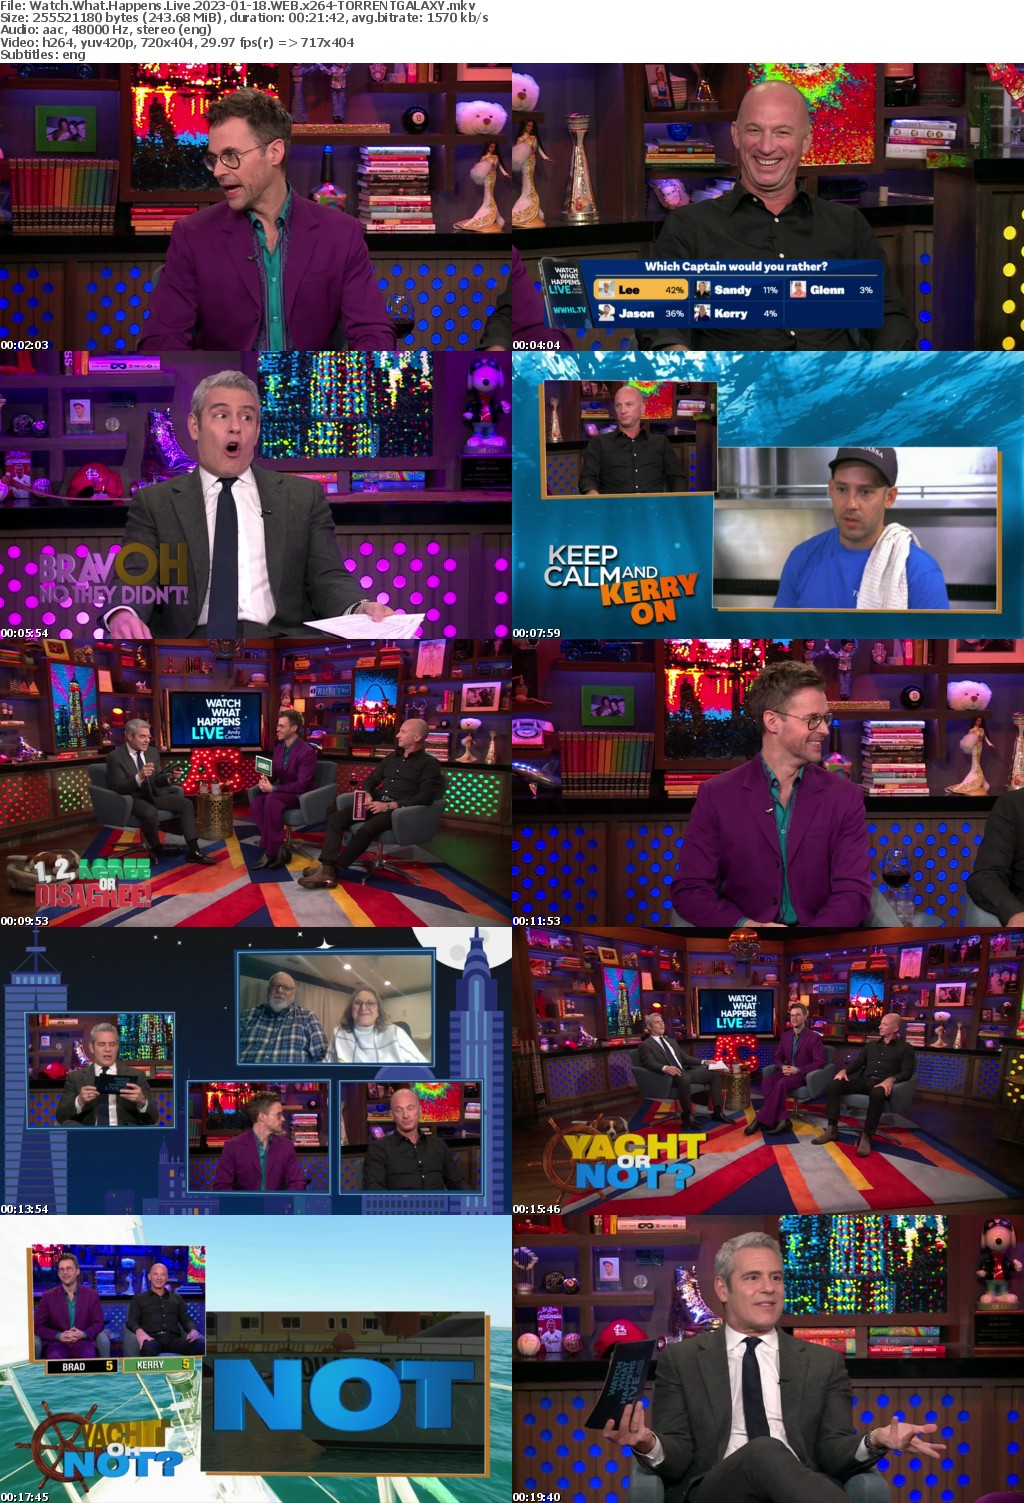 Watch What Happens Live 2023-01-18 WEB x264-GALAXY